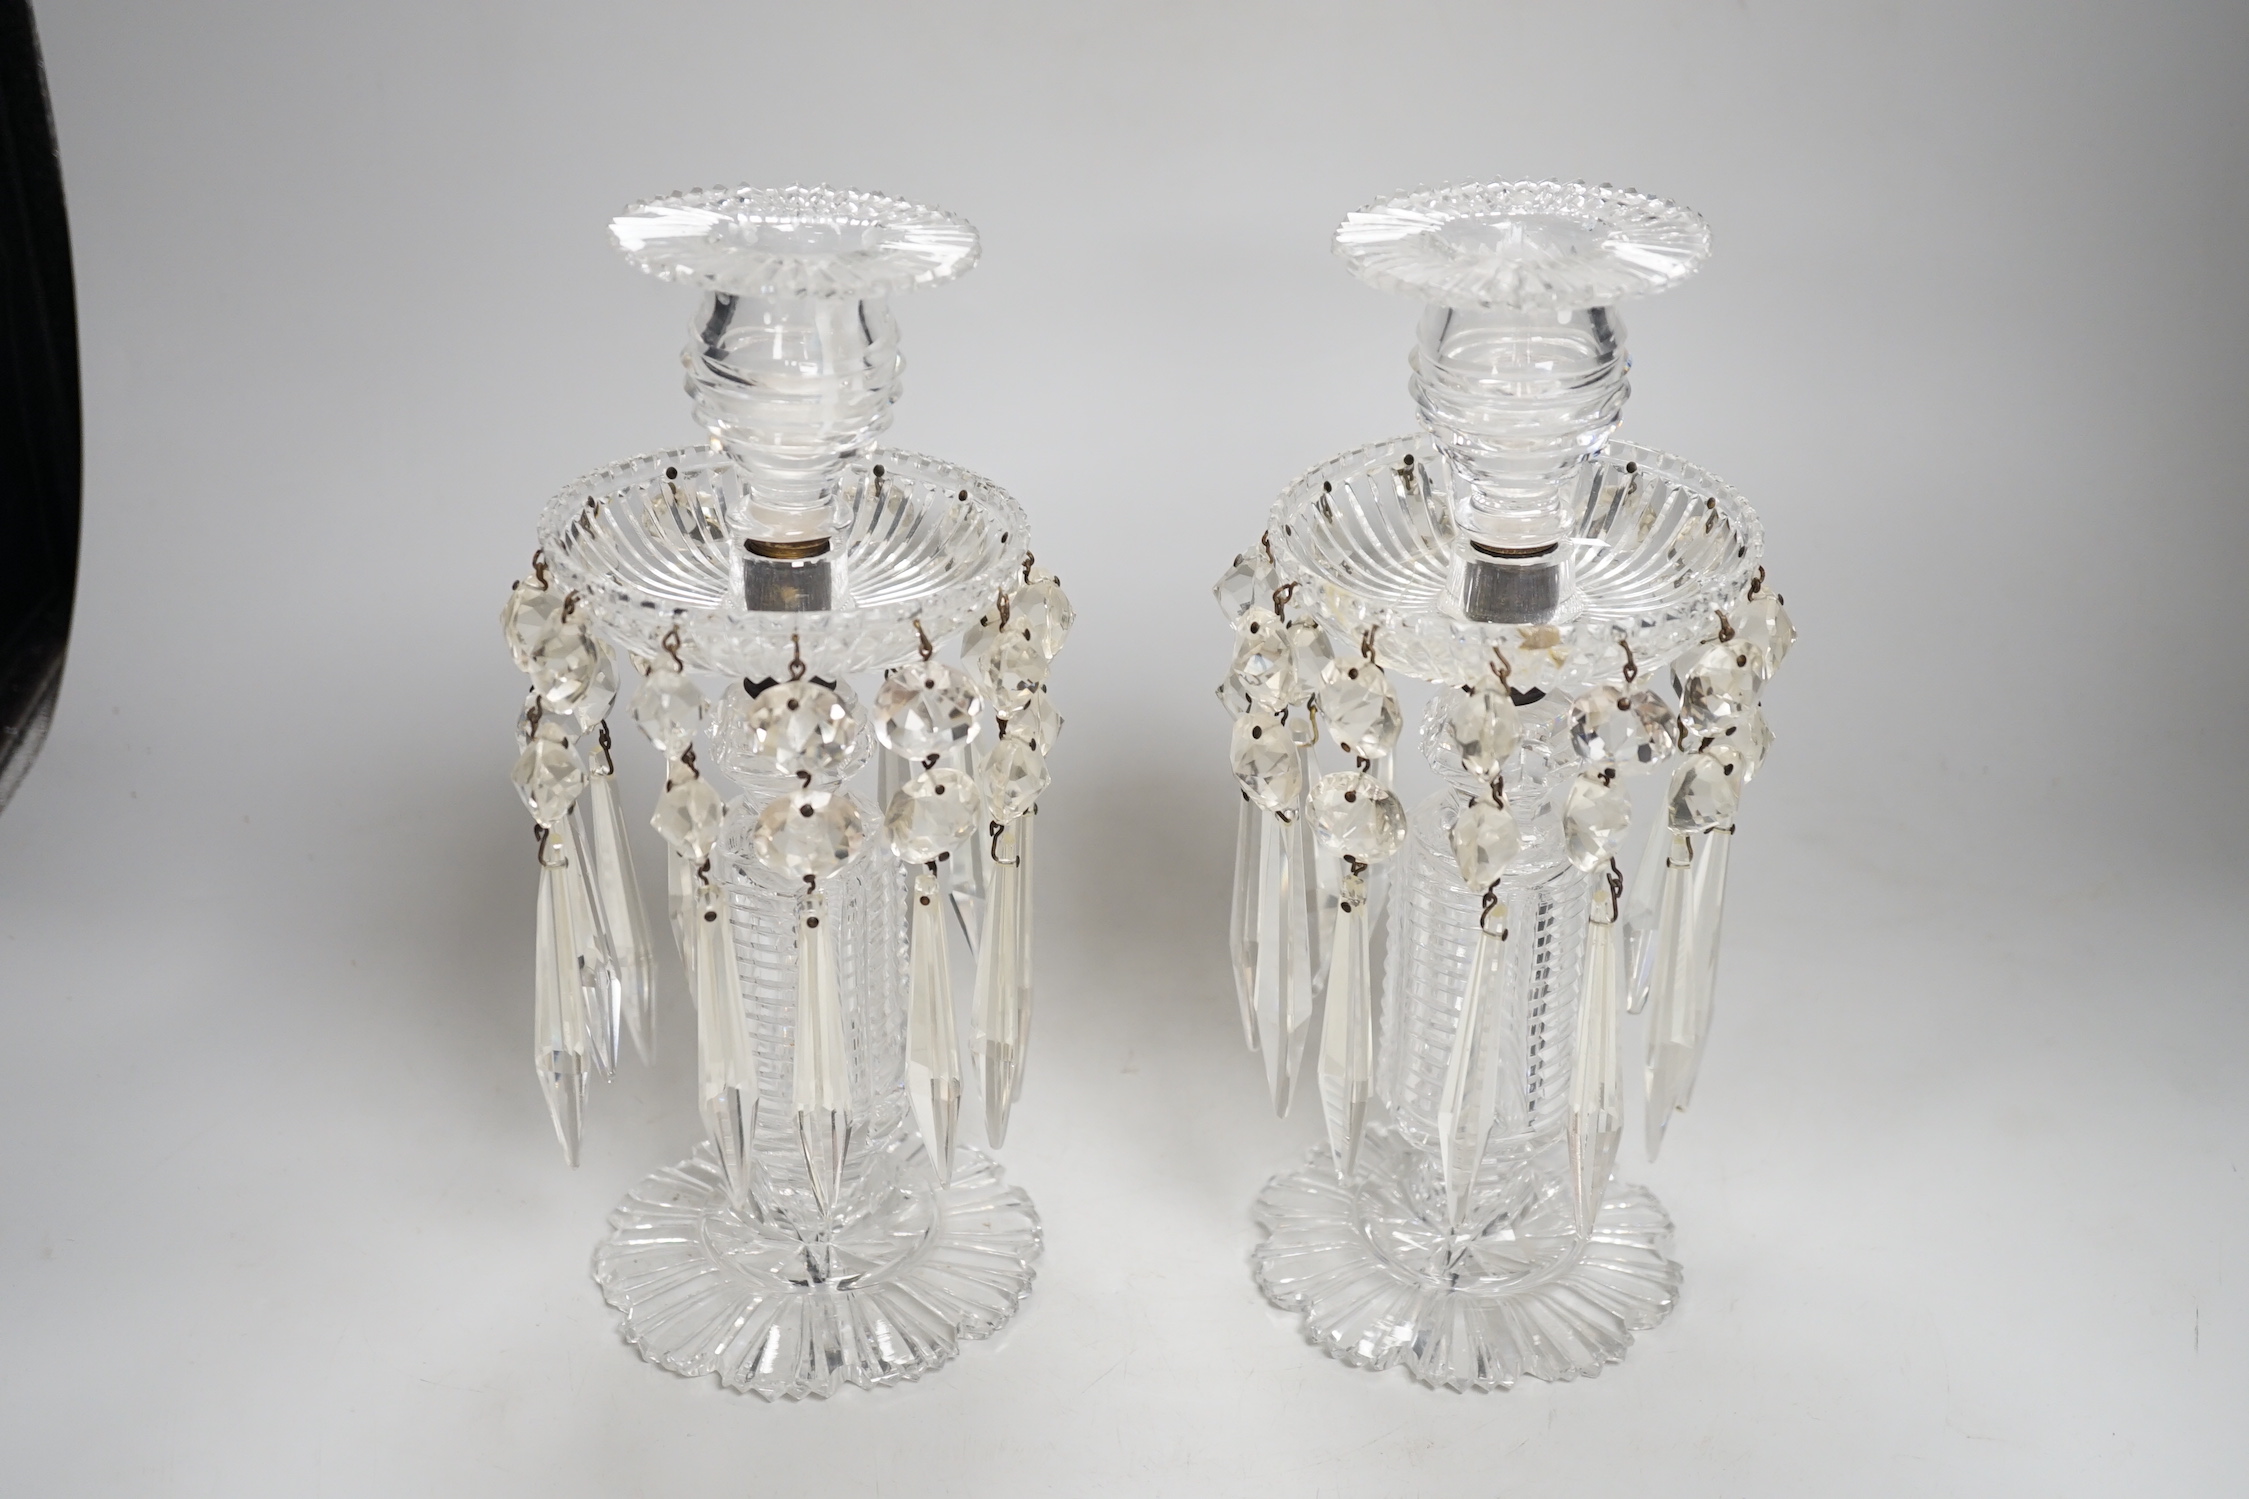 A pair of 19th century cut glass table lustres, 26cm high